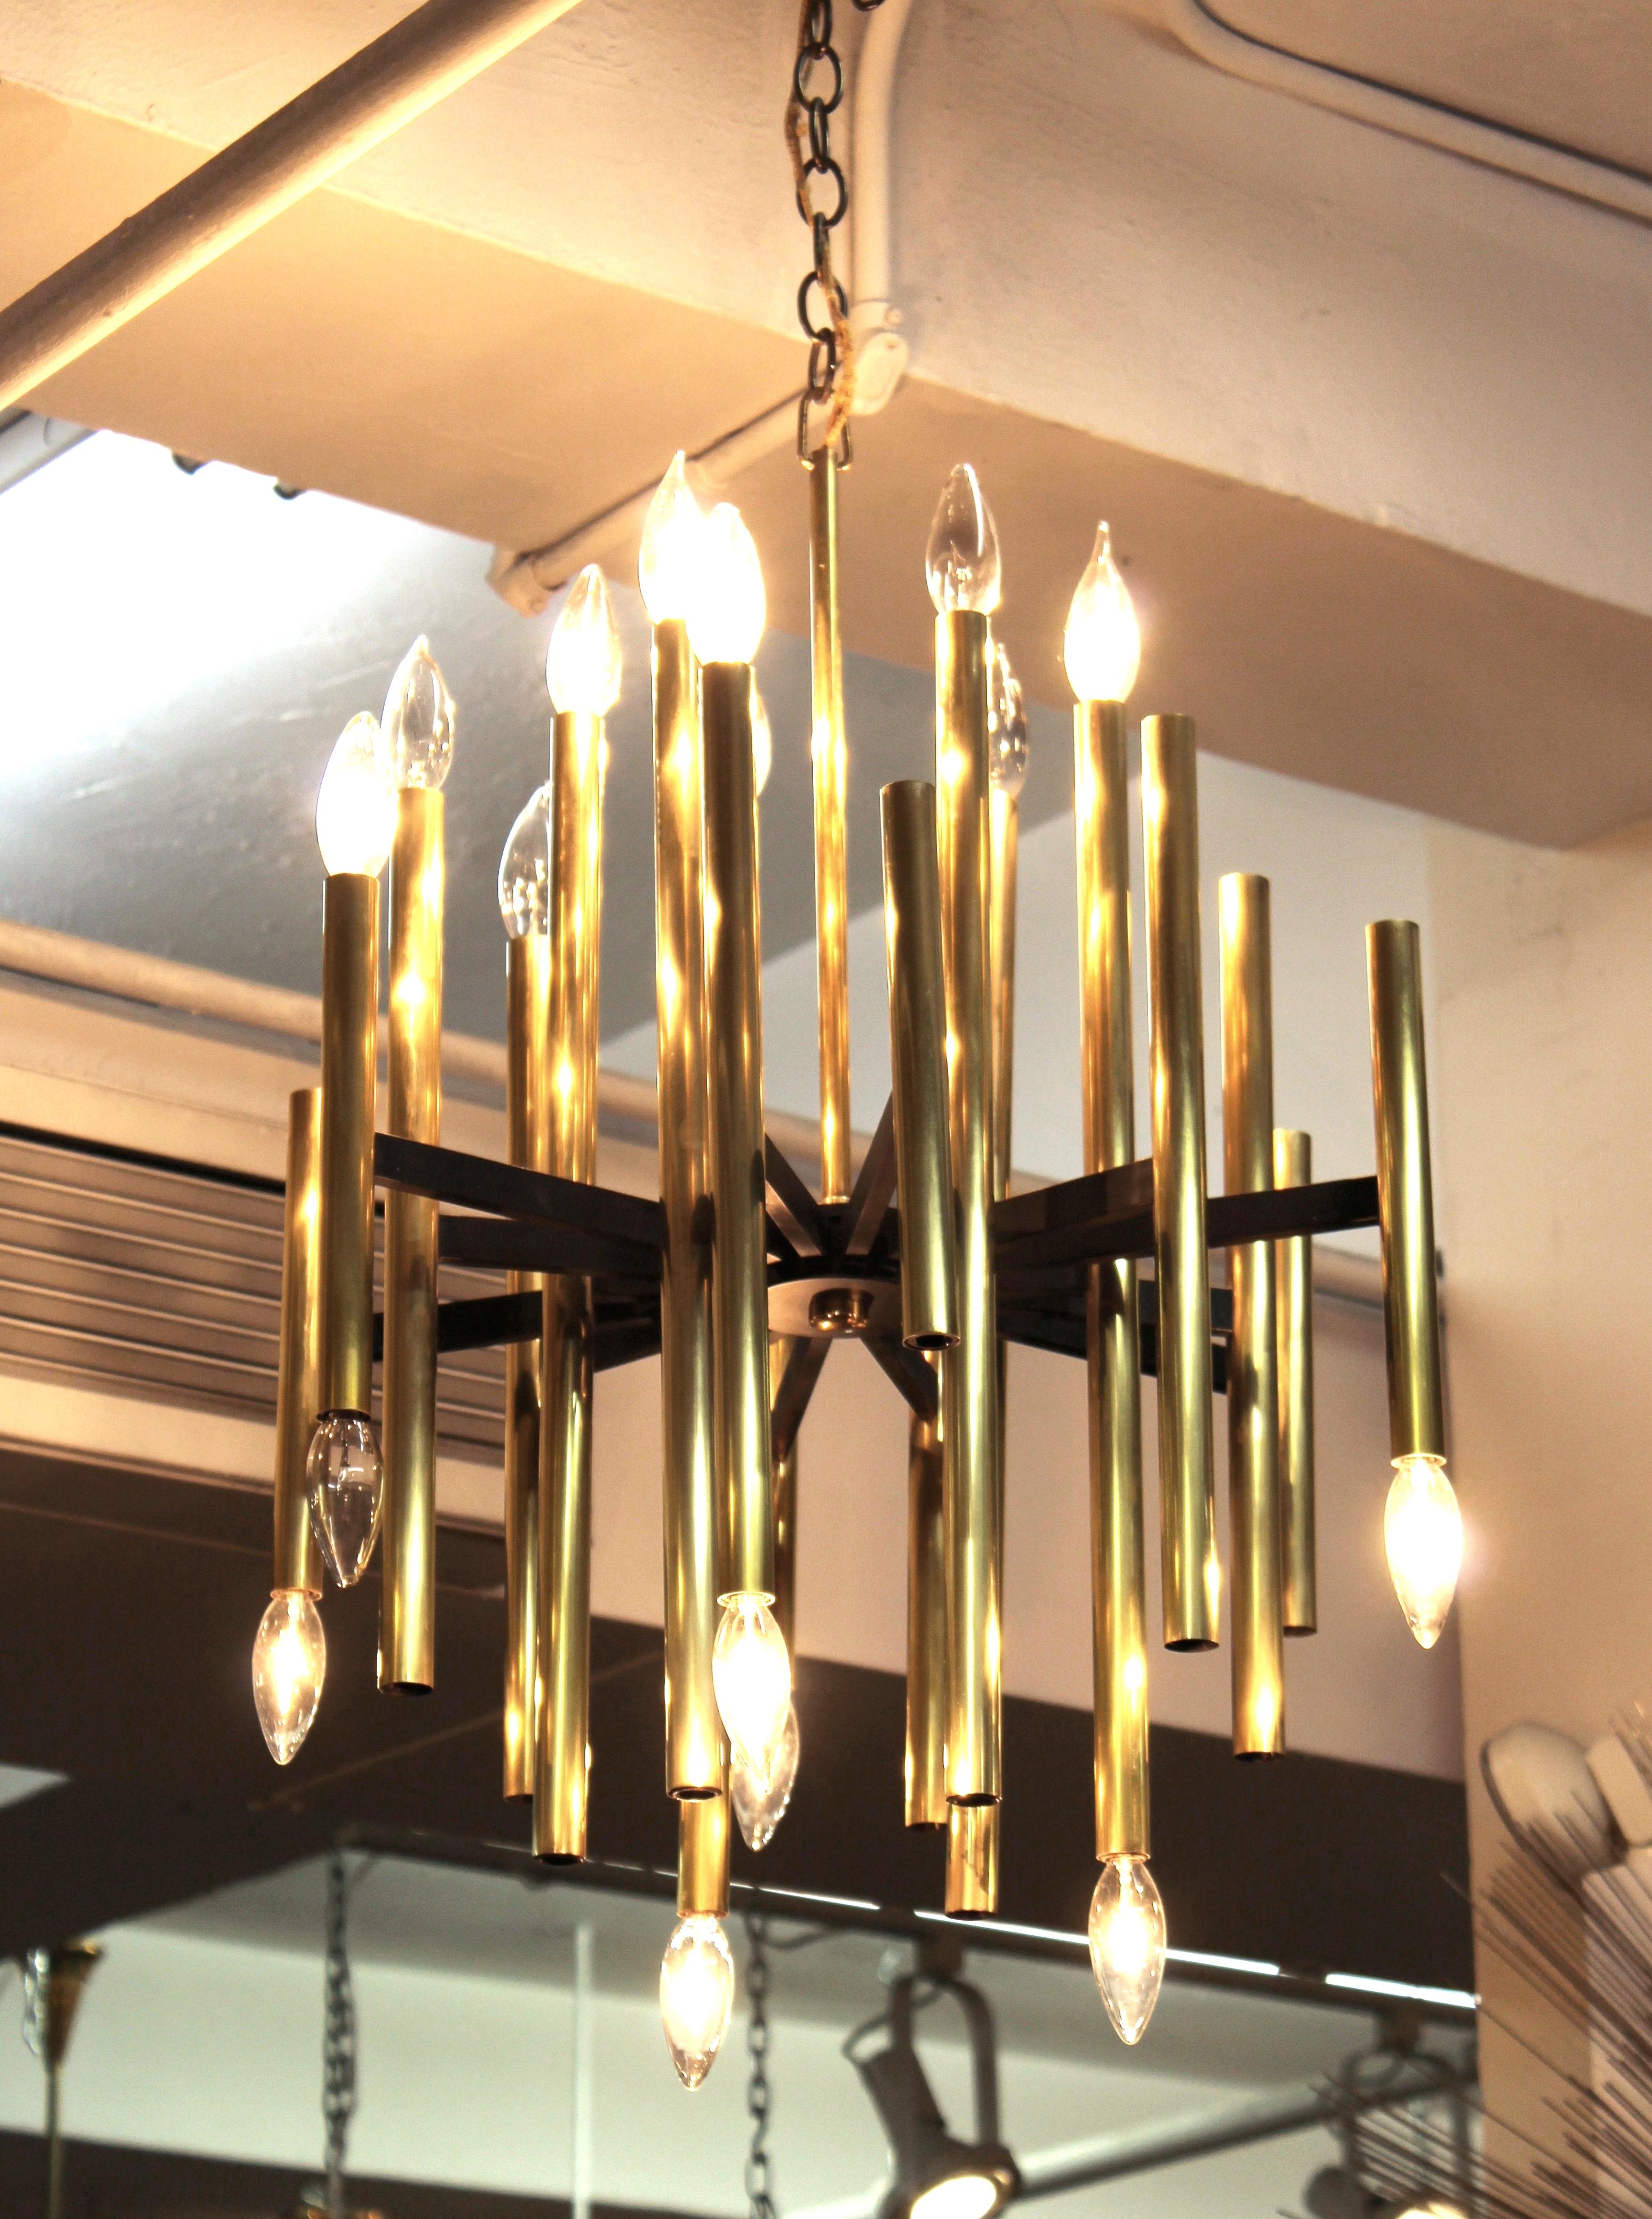 Modernist chandelier with brass structure, made by Lightolier in Italy. The piece has a multitude of arms stretched out in various lengths and is in great vintage condition. Rewired to meet current standards.